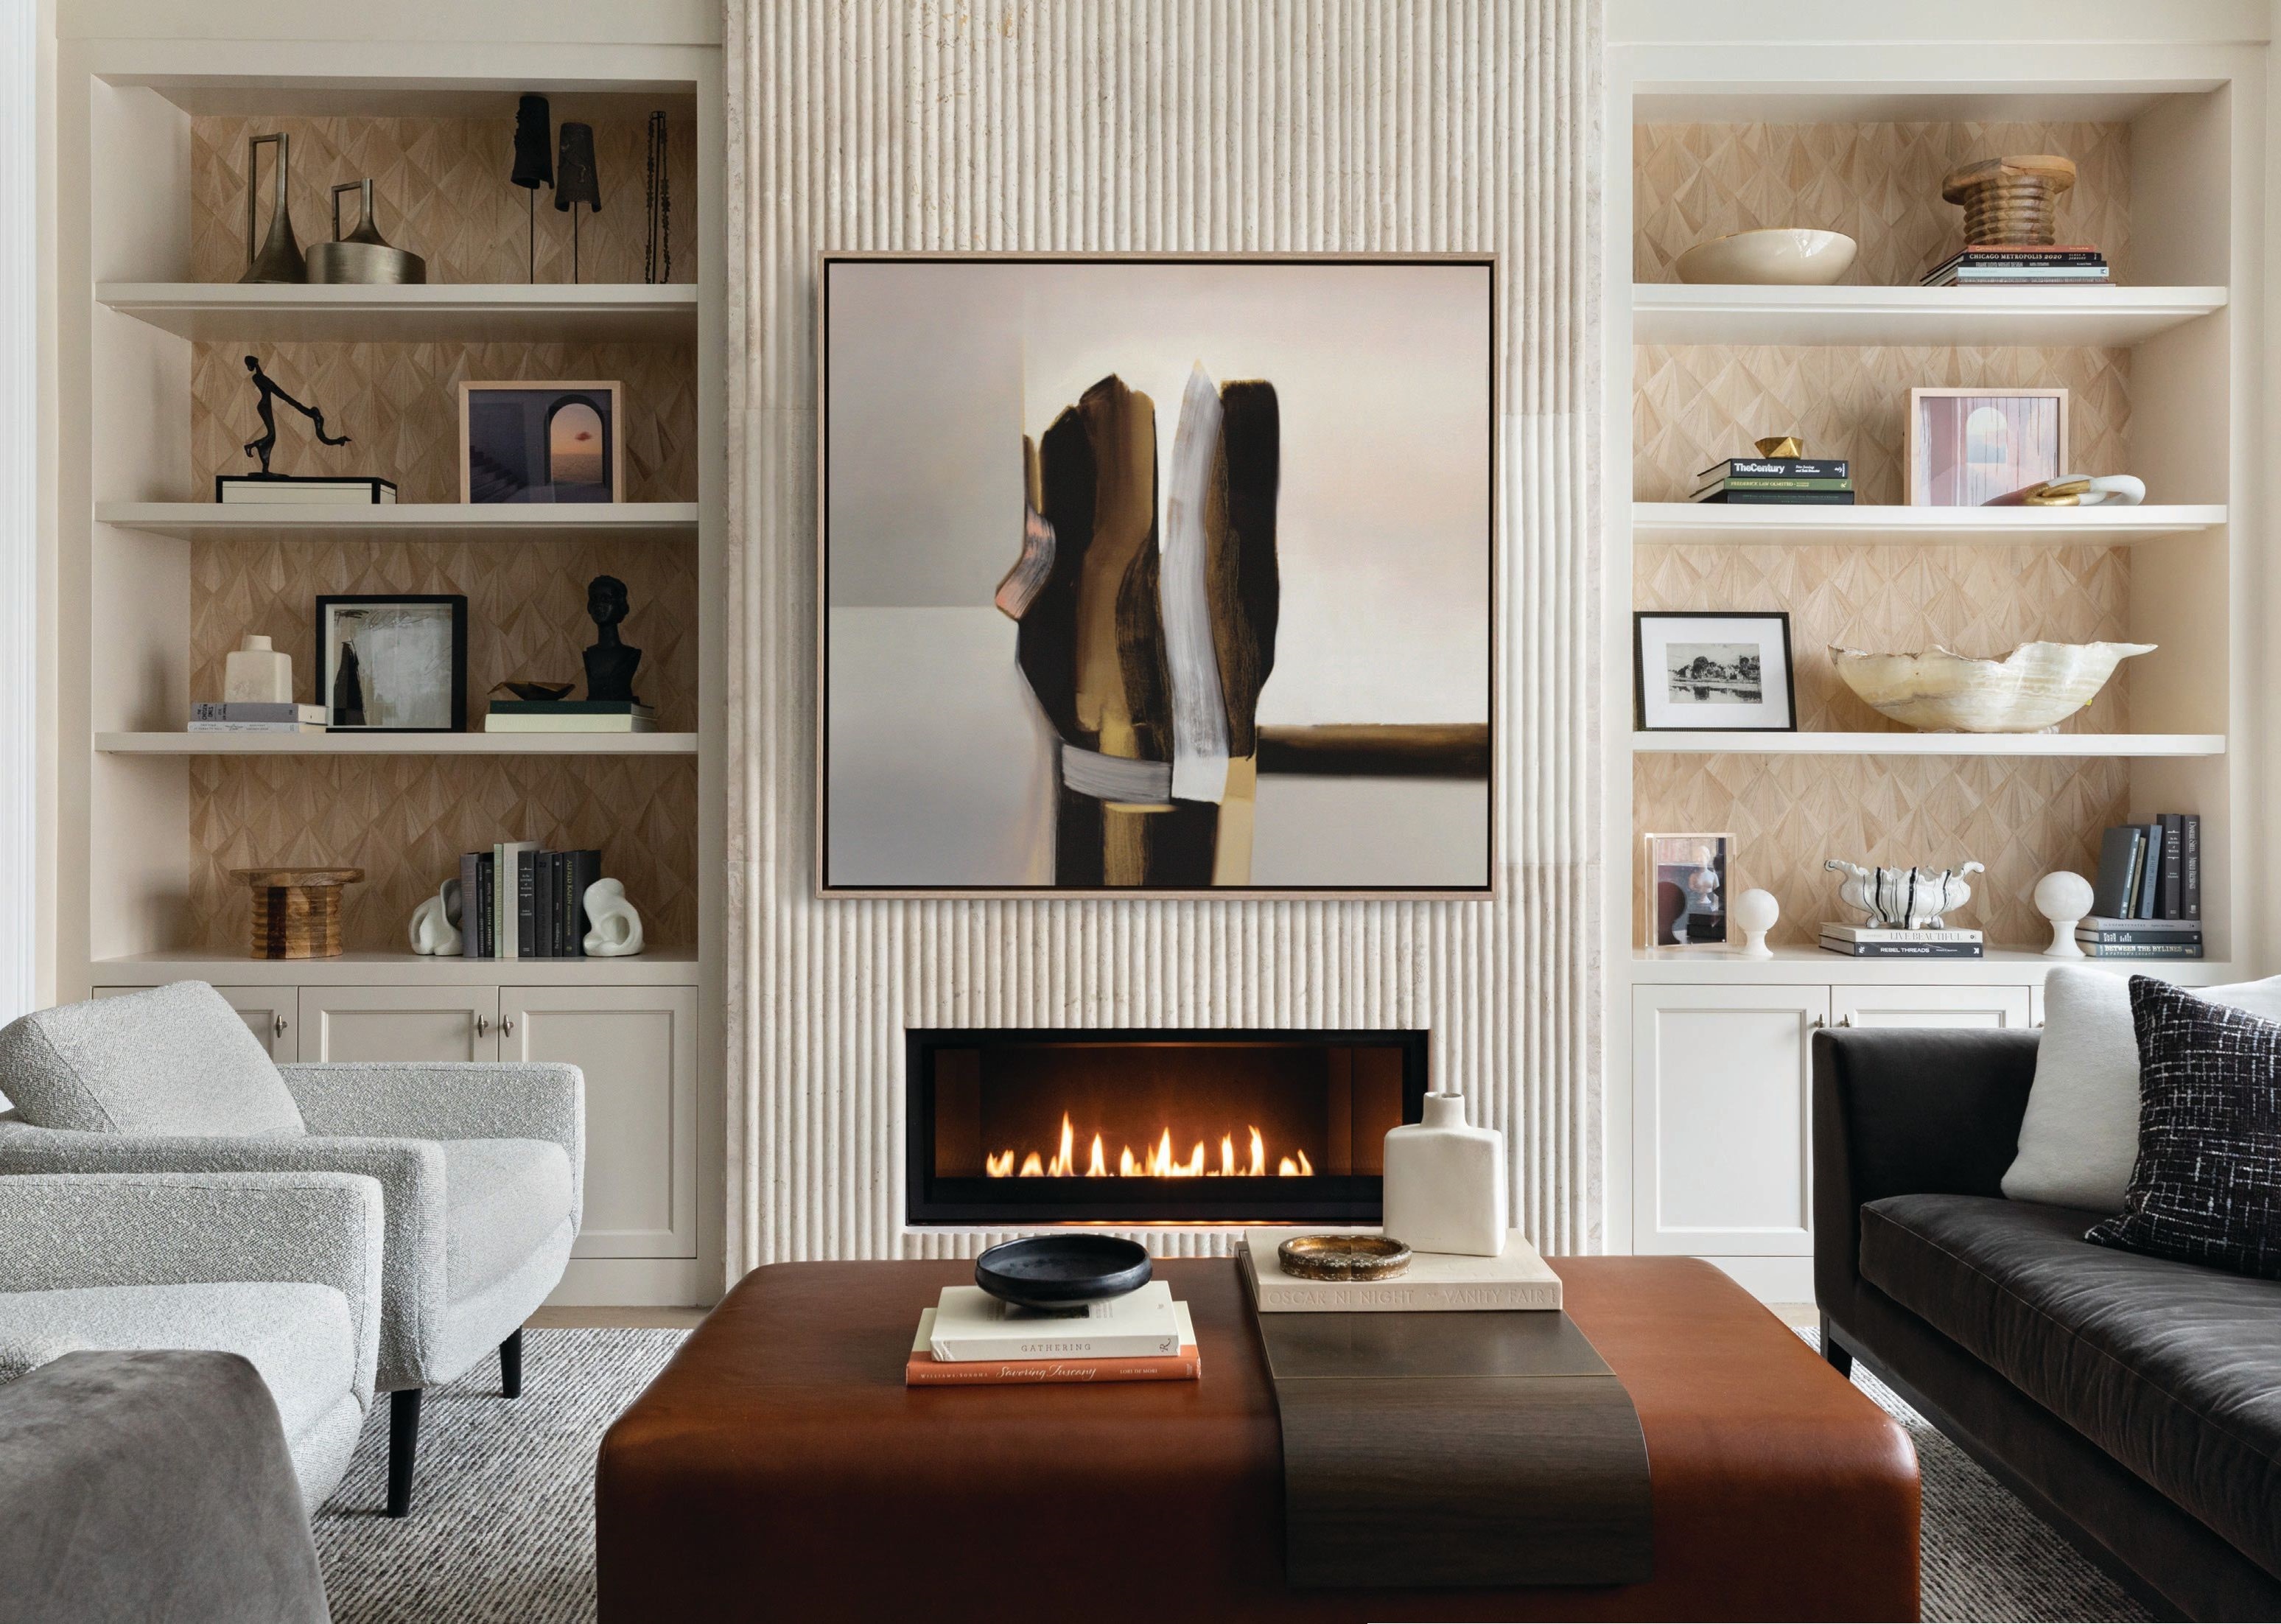 The family room features a custom Lumifer cocktail ottoman/table covered in ginger leather from Keleen Leathers, plus one of the project’s pièces de résistance: a showstopping custom fireplace that runs the full height of the wall designed by Donna Mondi Interior Design and fabricated by Material Bespoke Stone   Tile. Photographed by Aimée Mazzenga